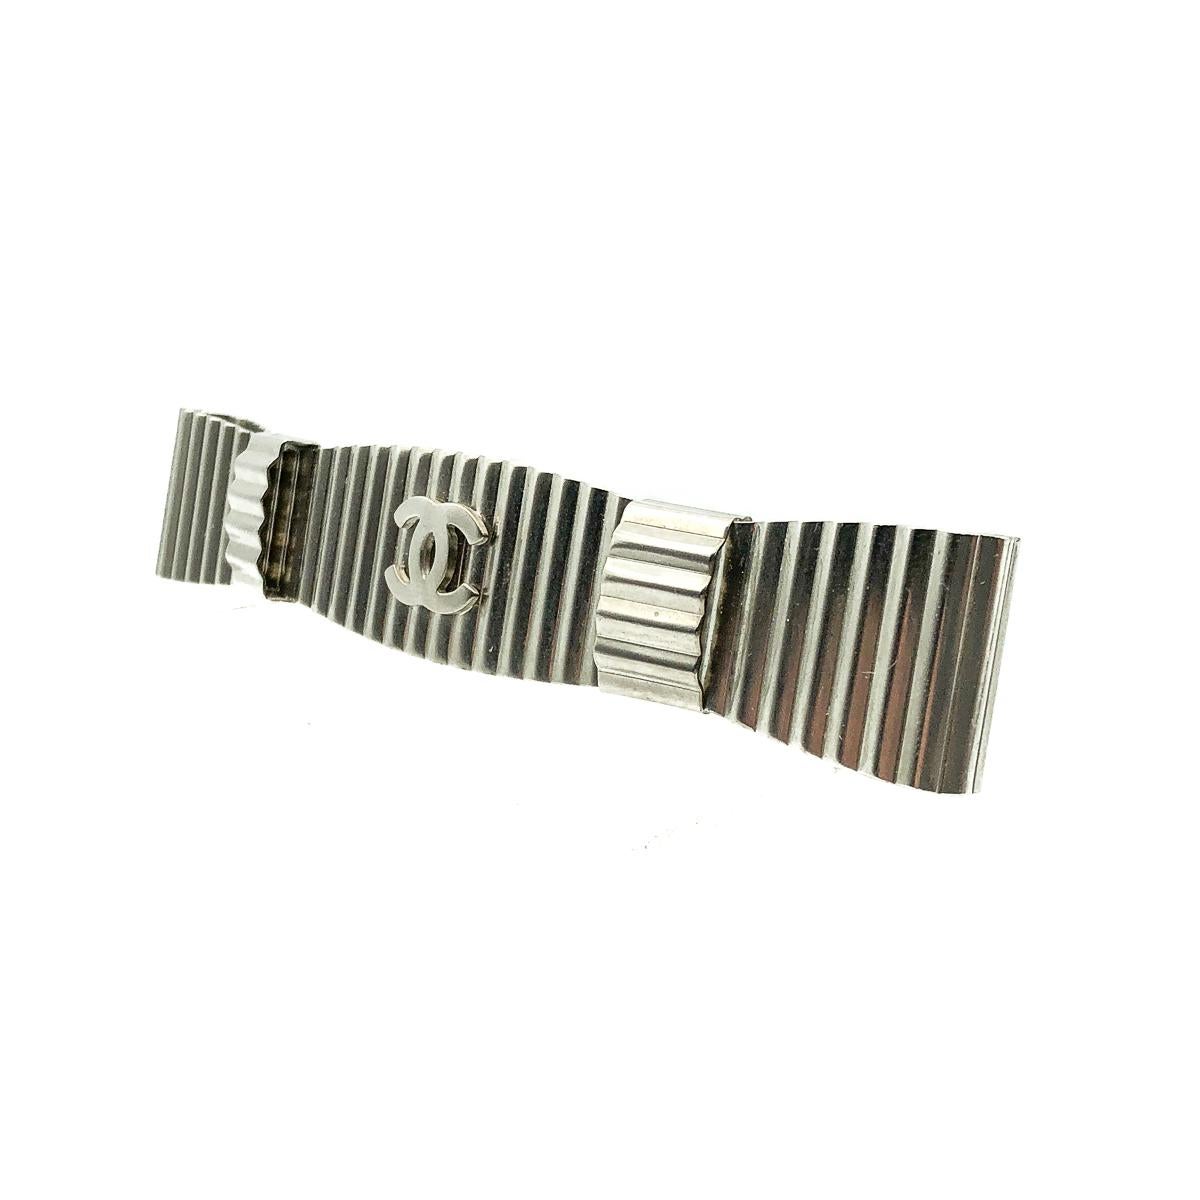 The forever iconic Chanel CC Barrette Hairslide. Crafted in silver-tone metal. Featuring an elongated bow style set with the interlocking CC logo. In very good condition, signed, approx. 11cms. An iconic piece from the House that will add the